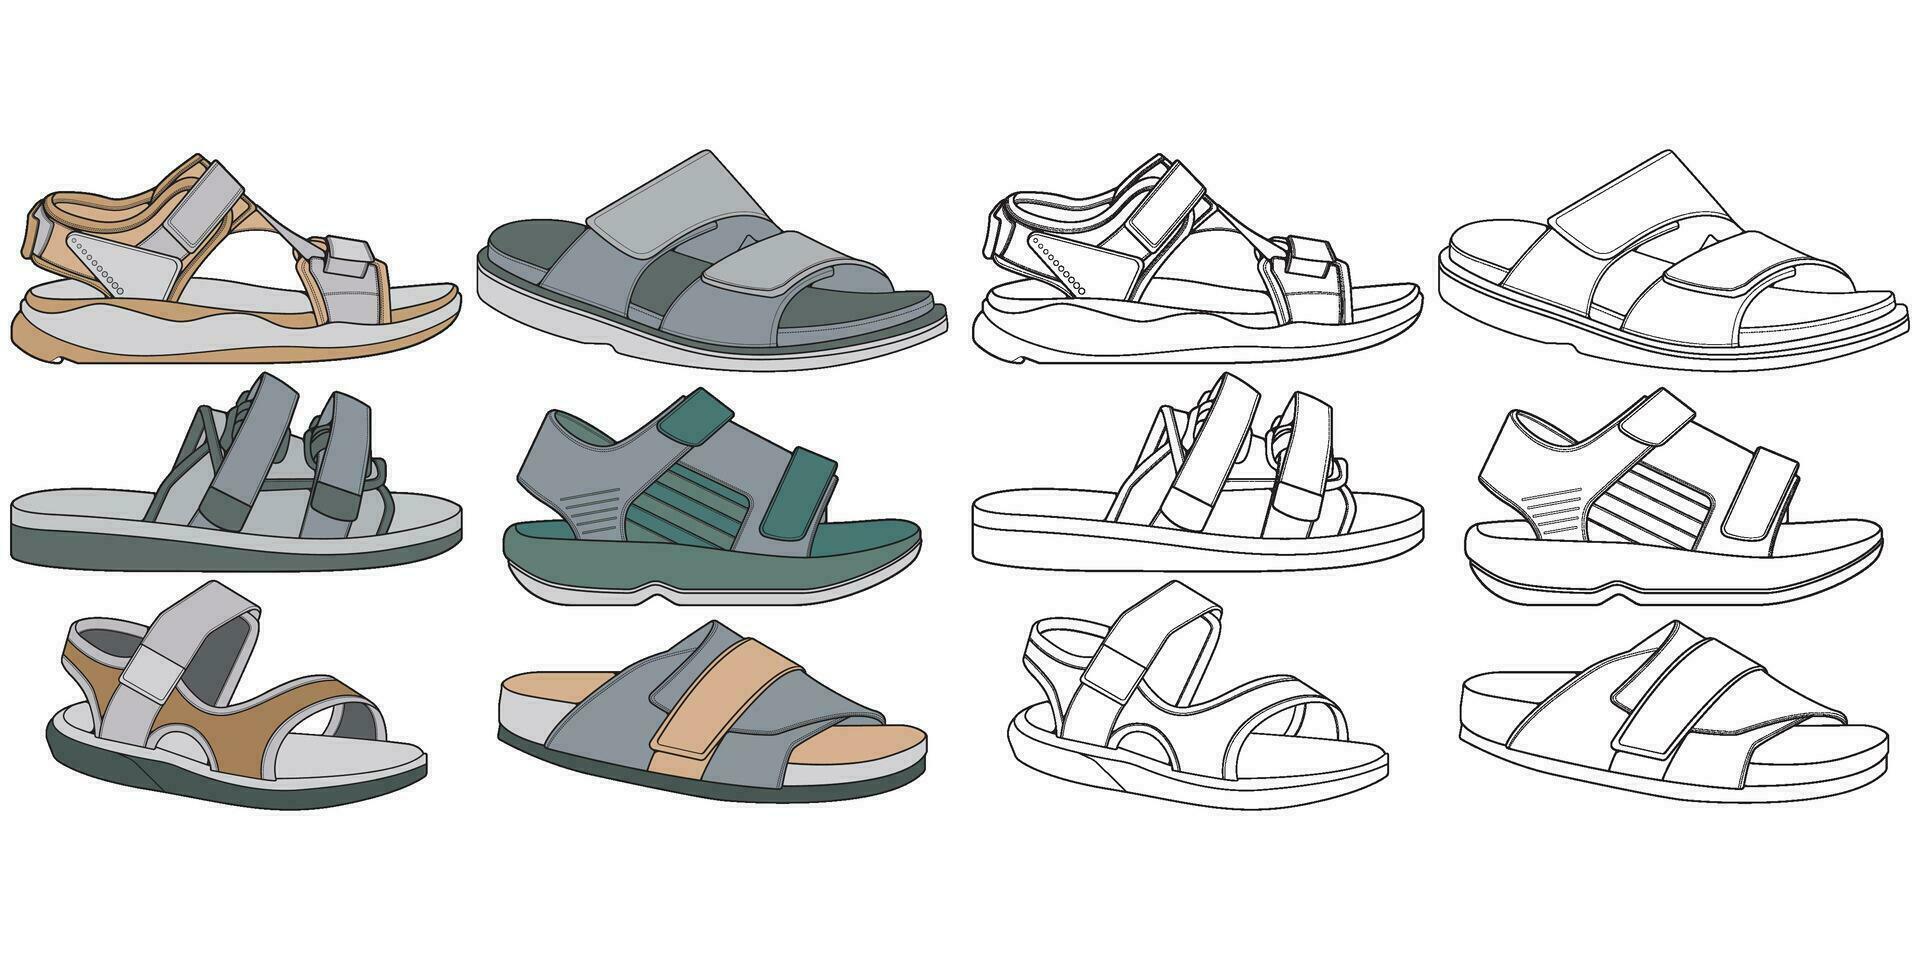 Strap sandals coloring drawing vector, strap sandals drawn in a sketch style, bundling strap sandals template full color, vector Illustration.